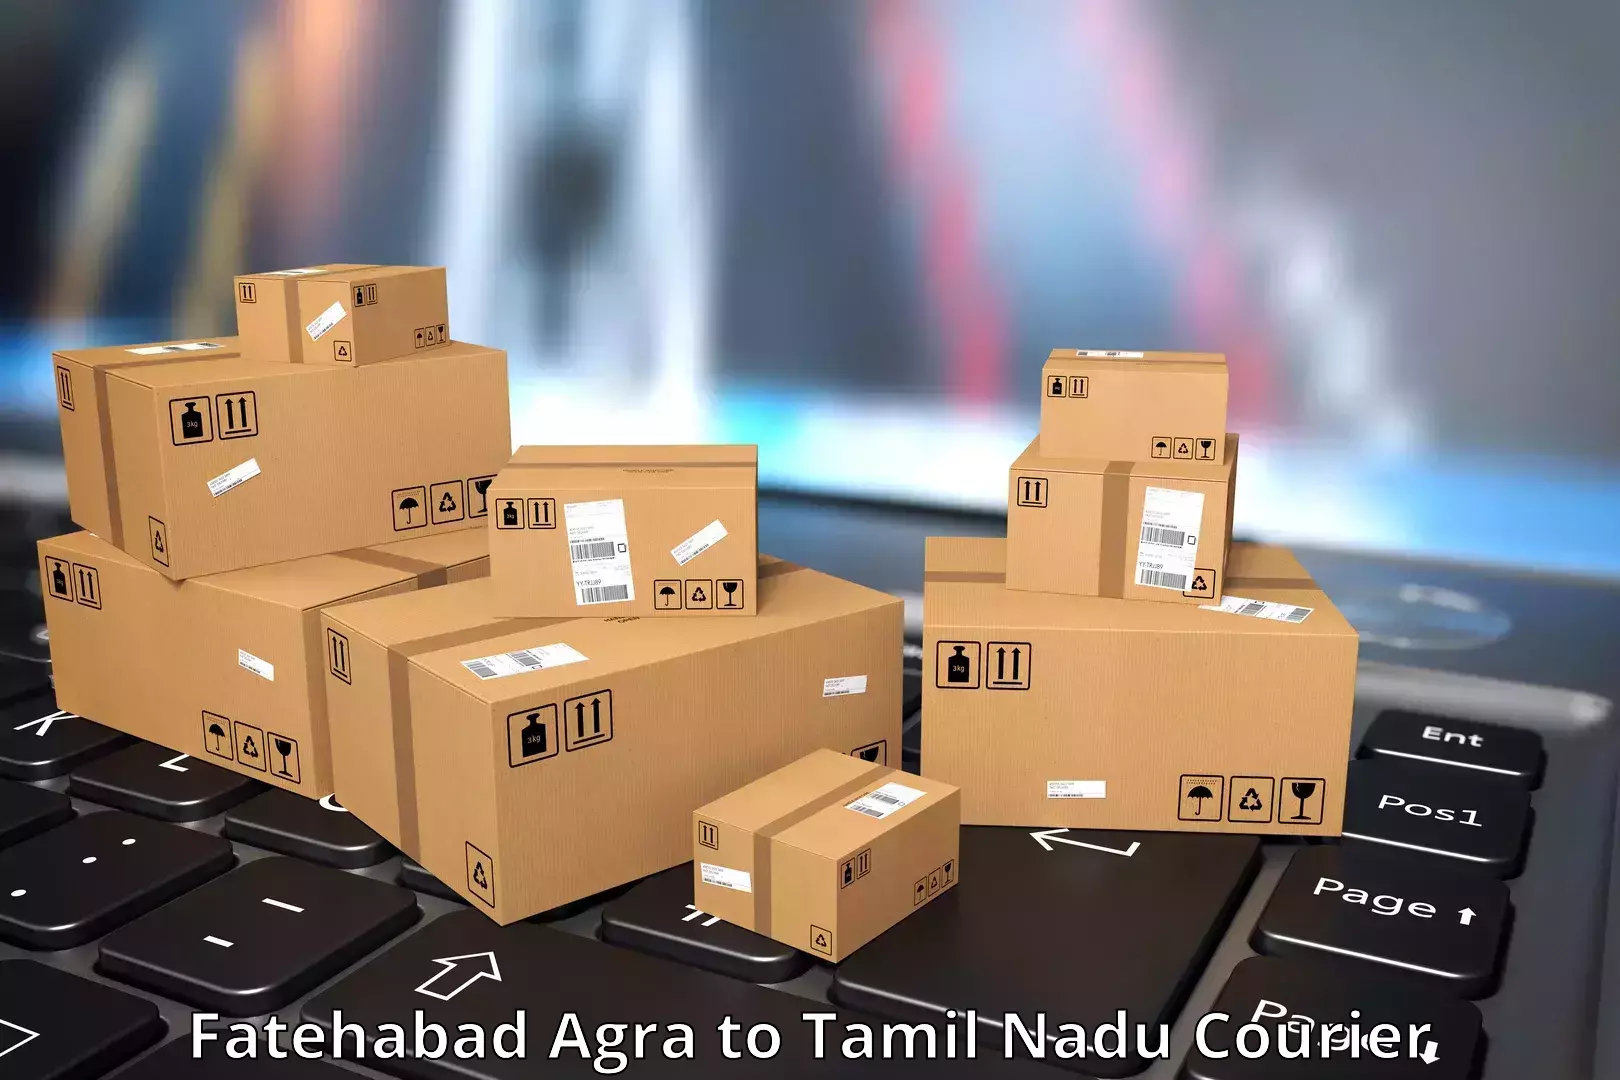 Comprehensive shipping services Fatehabad Agra to Chengalpattu